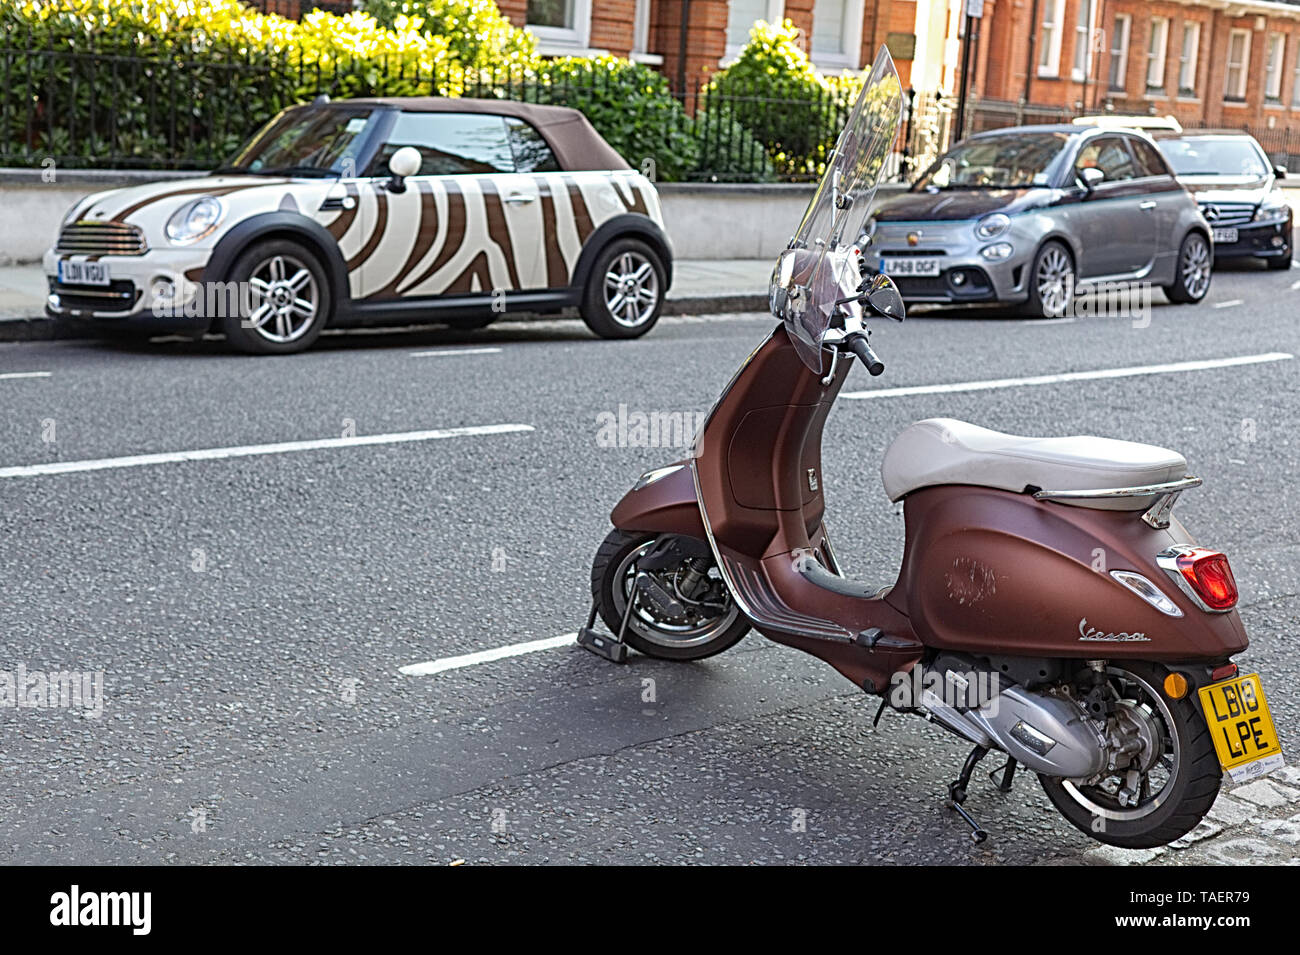 Scooter and a mini Parked in Mayfair, London Stock Photo